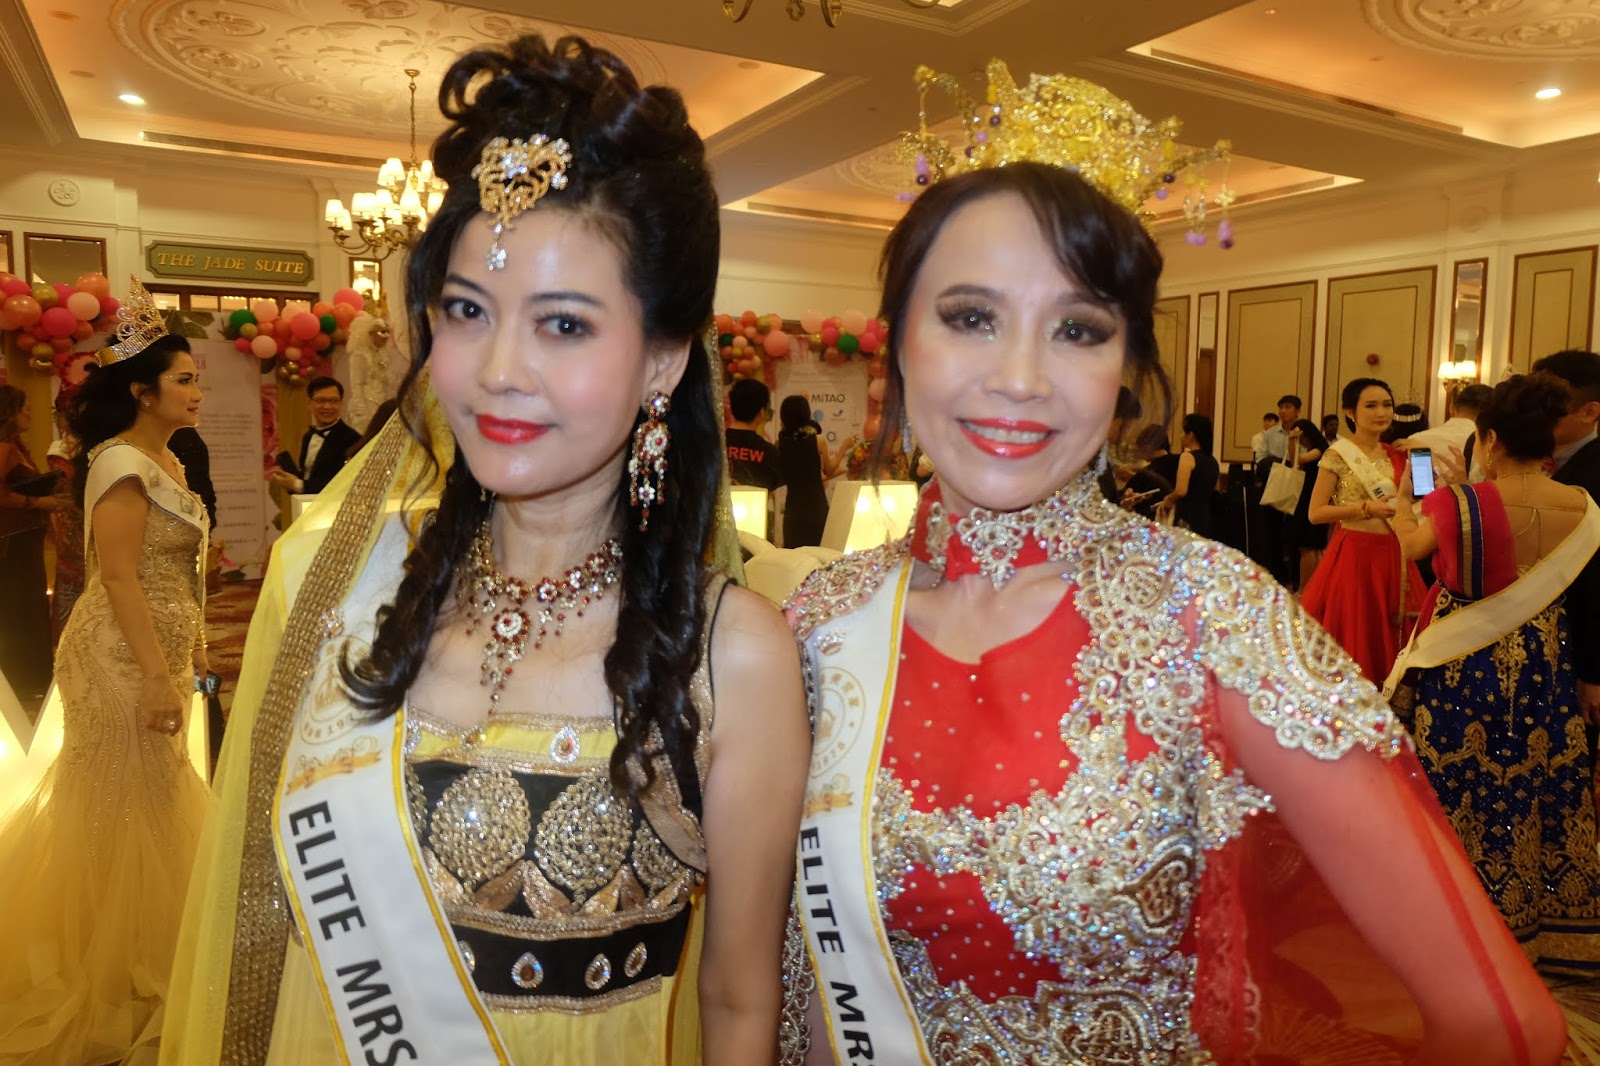 Kee Hua Chee Live!: PART 1 OF DAY 2 OF 12th ANNUAL TSK MRS 